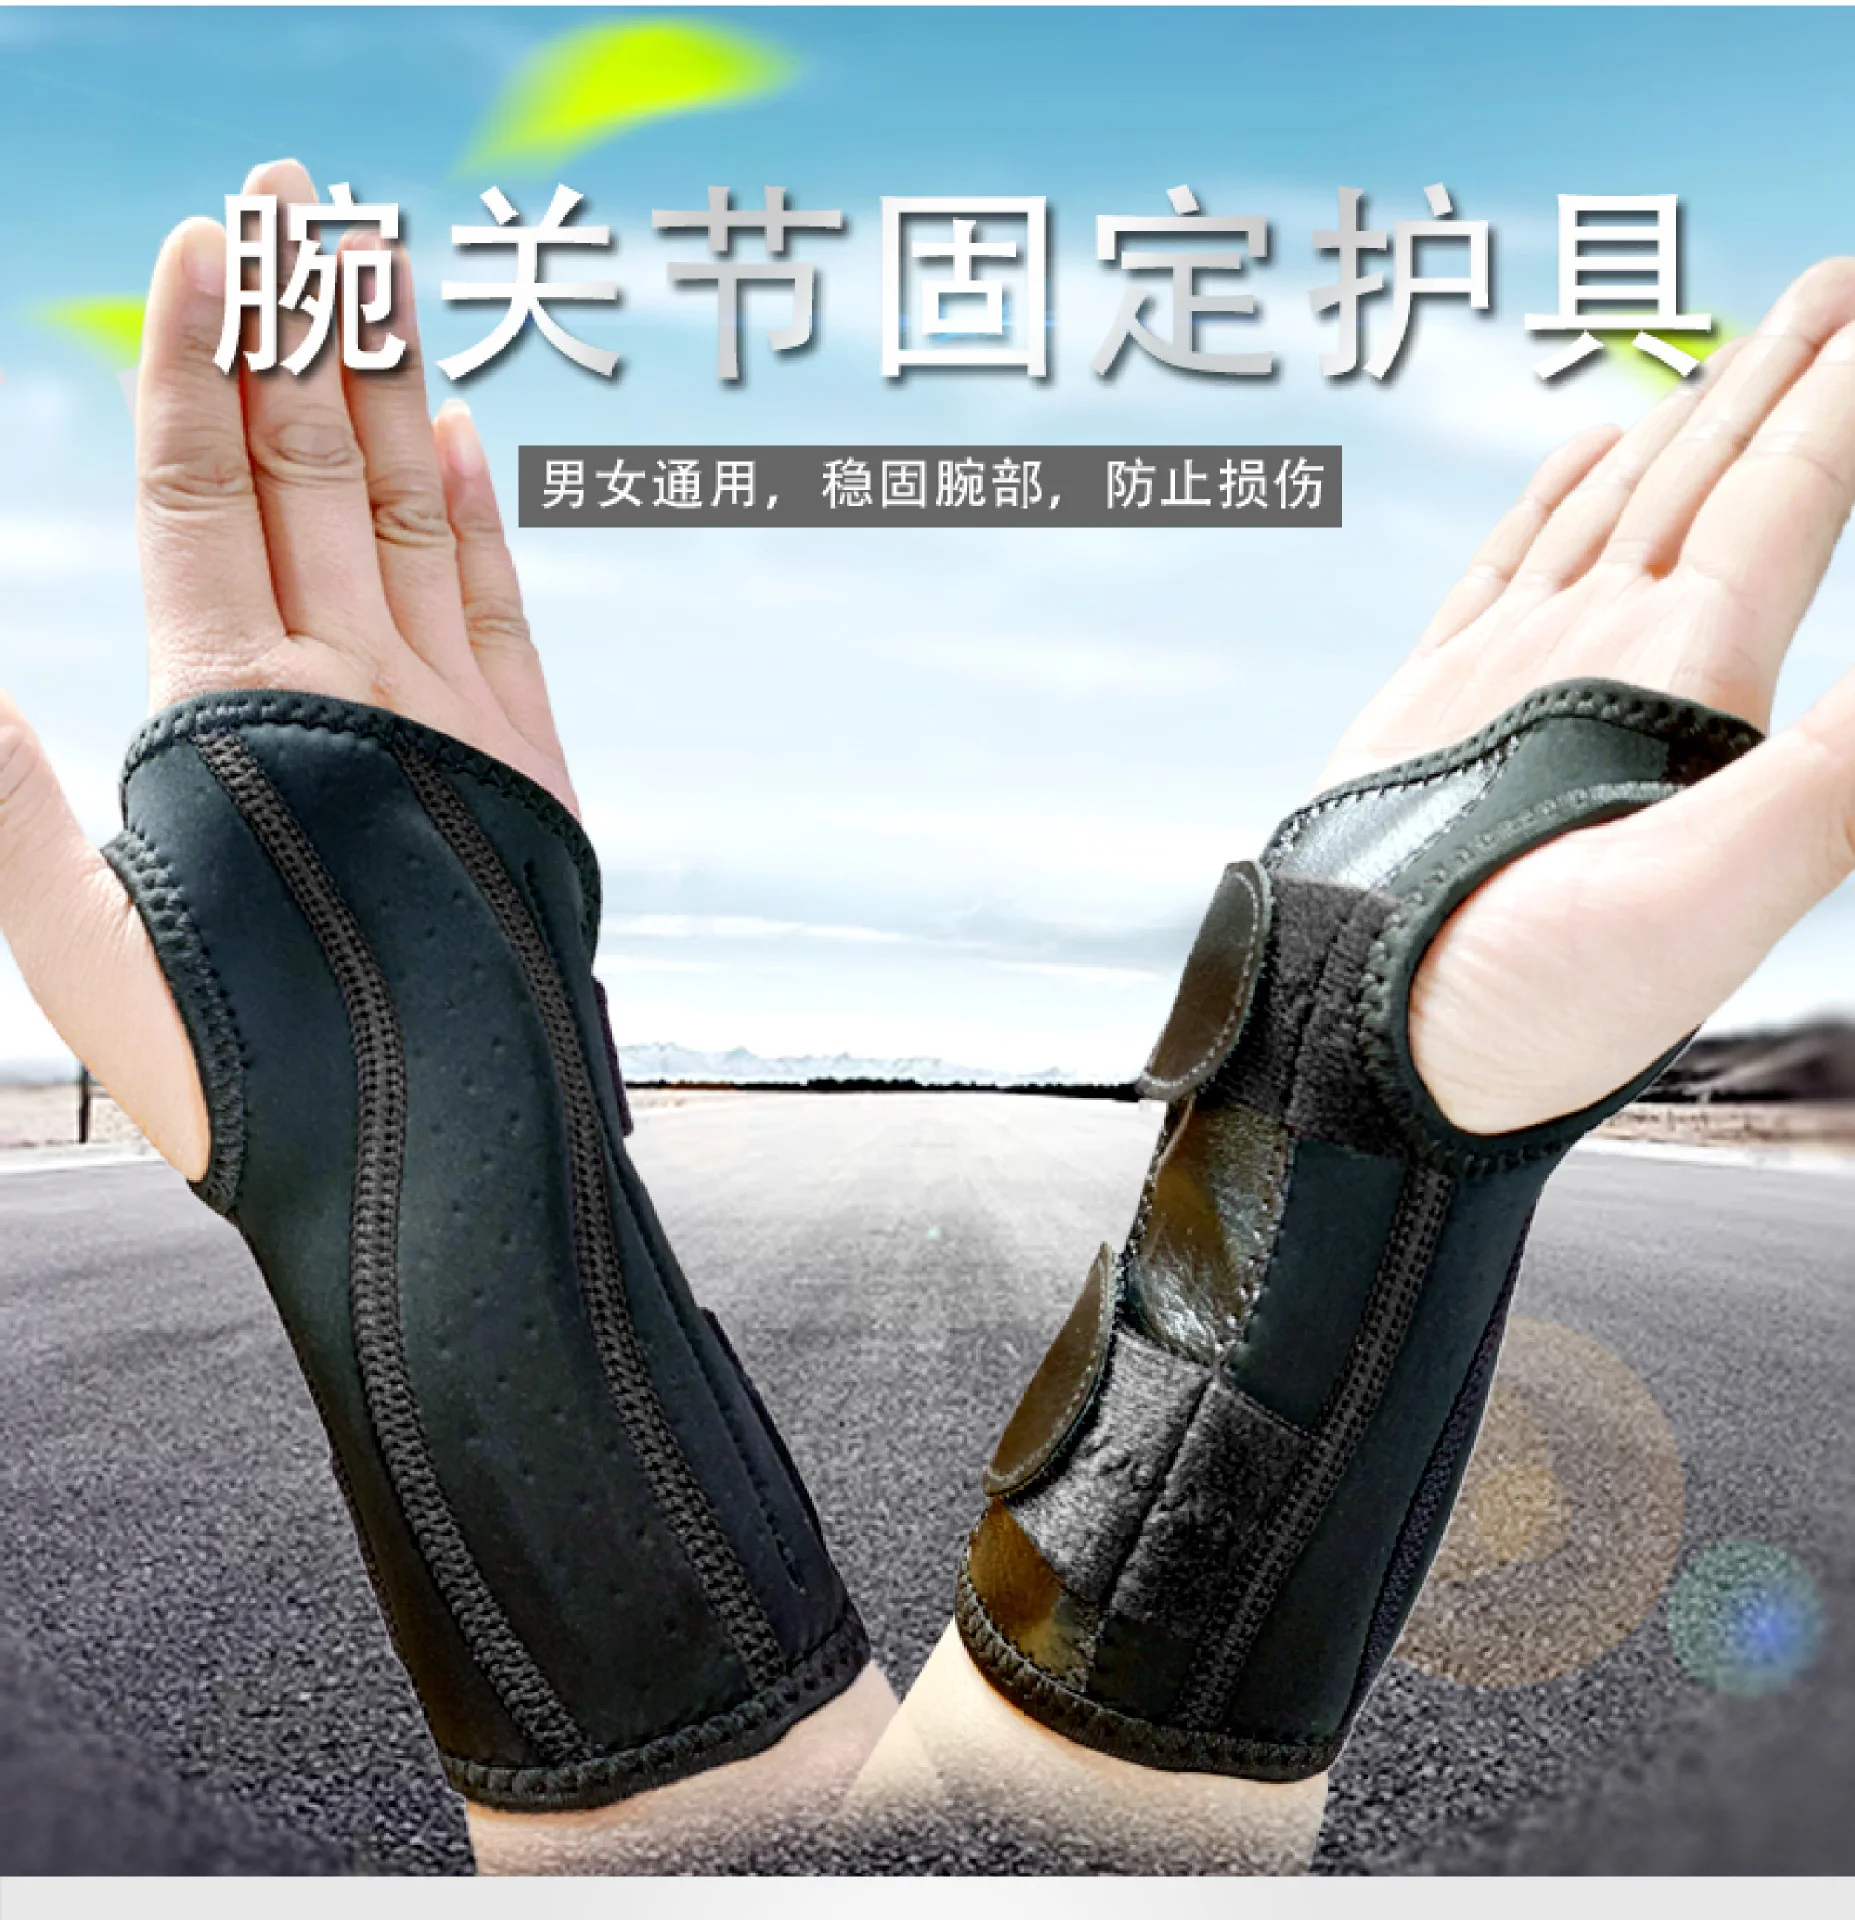 New Style Sprain Fixed Athletic Wristguards Wrist Fracture Fixed Splint Teenager Men's Women's Breathable